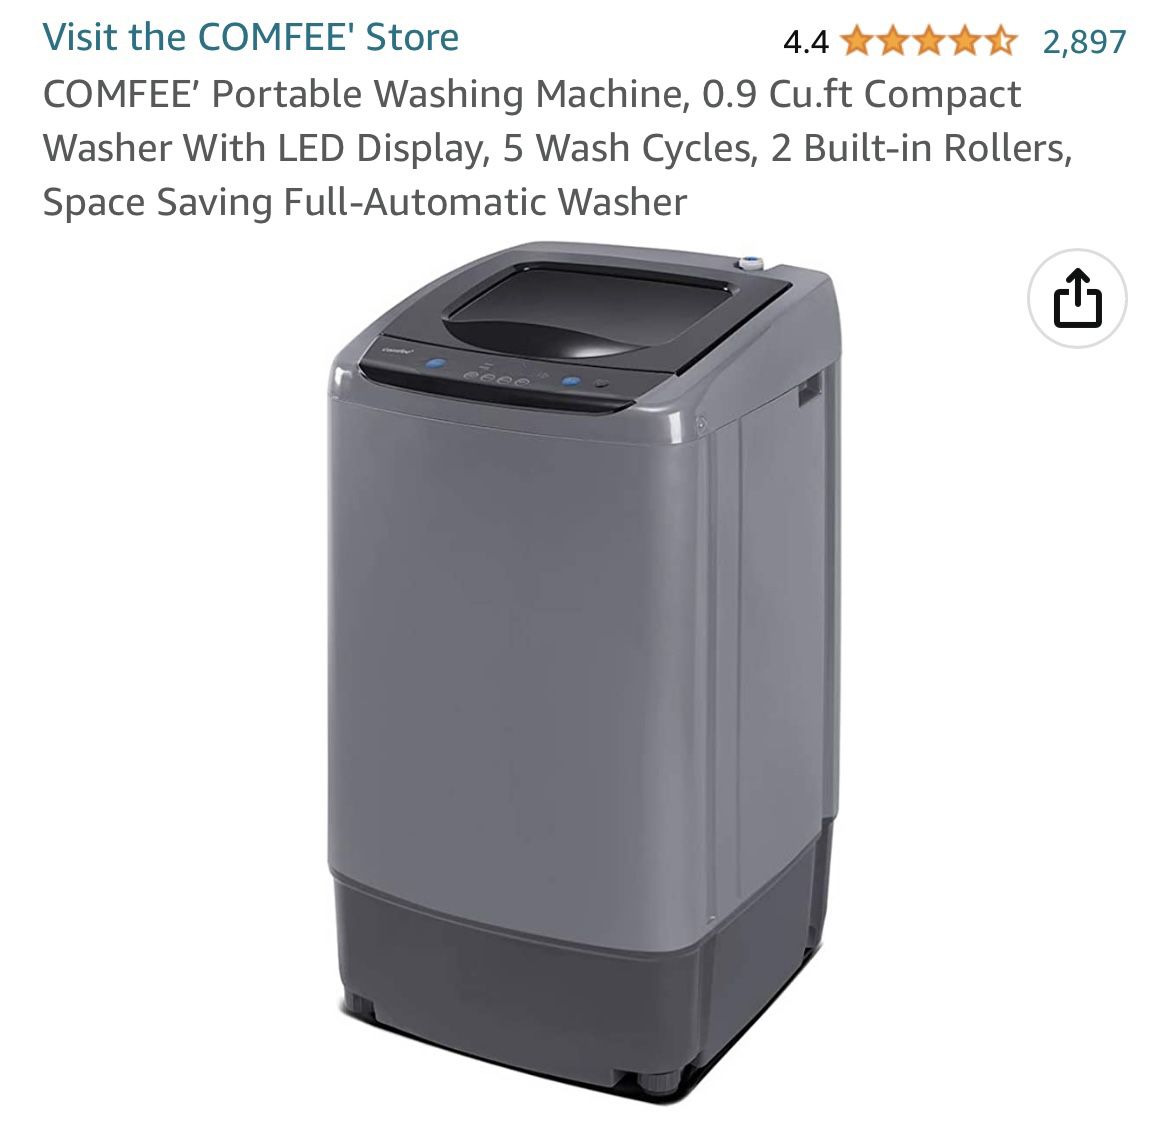 Zeny Portable Washer Washing Machine For Apartments for Sale in North  Arlington, NJ - OfferUp